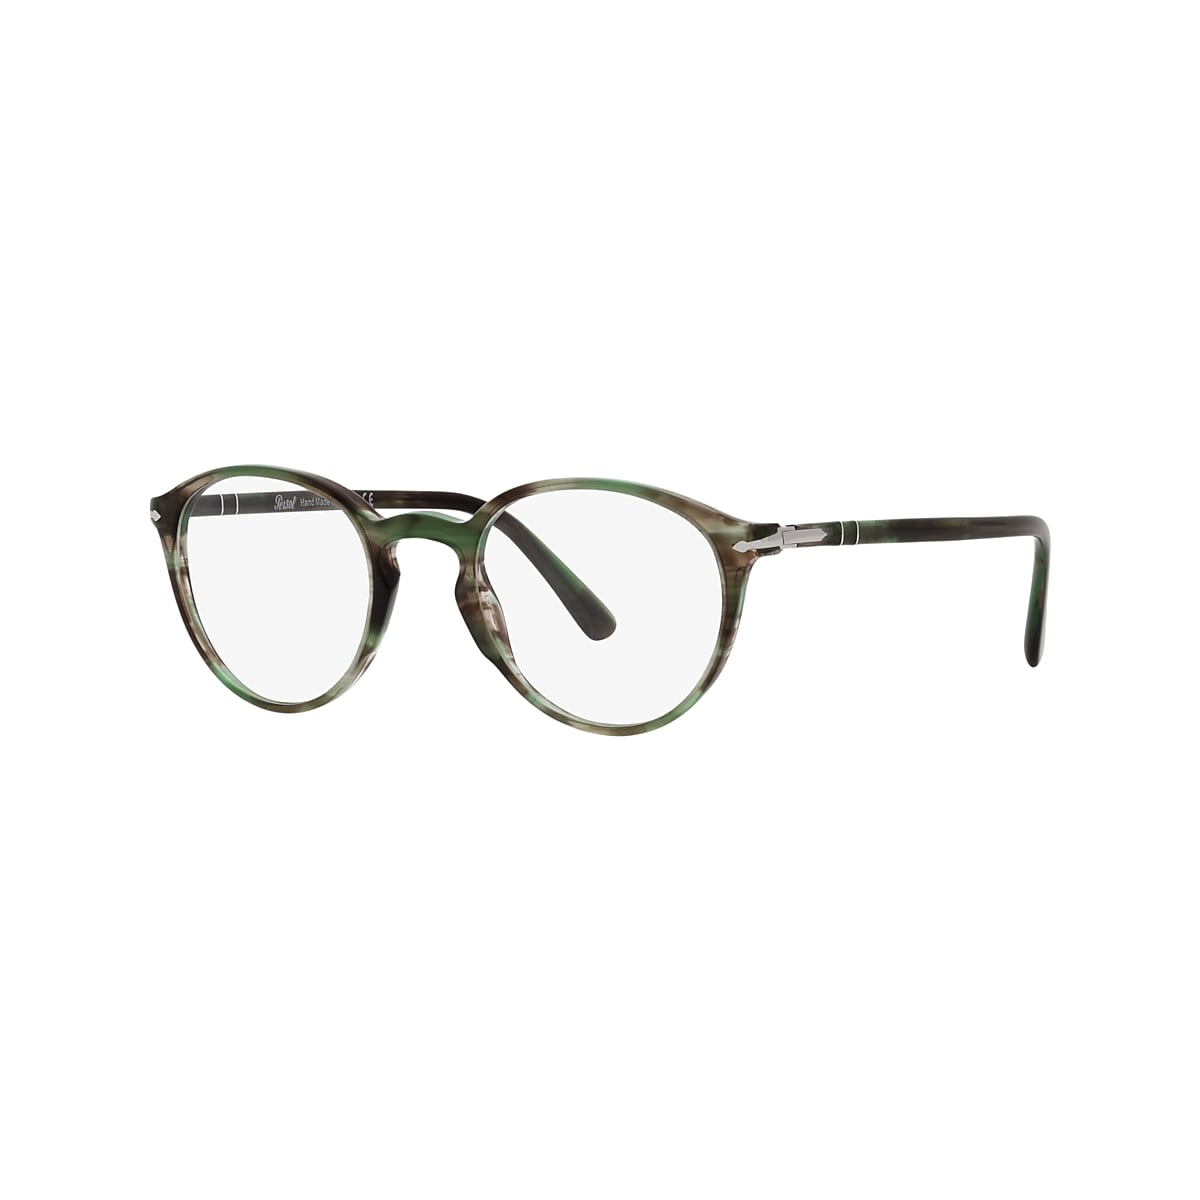 https://assets.persol.com/is/image/Persol/8056597641531_030A.png?impolicy=SEO_1x1